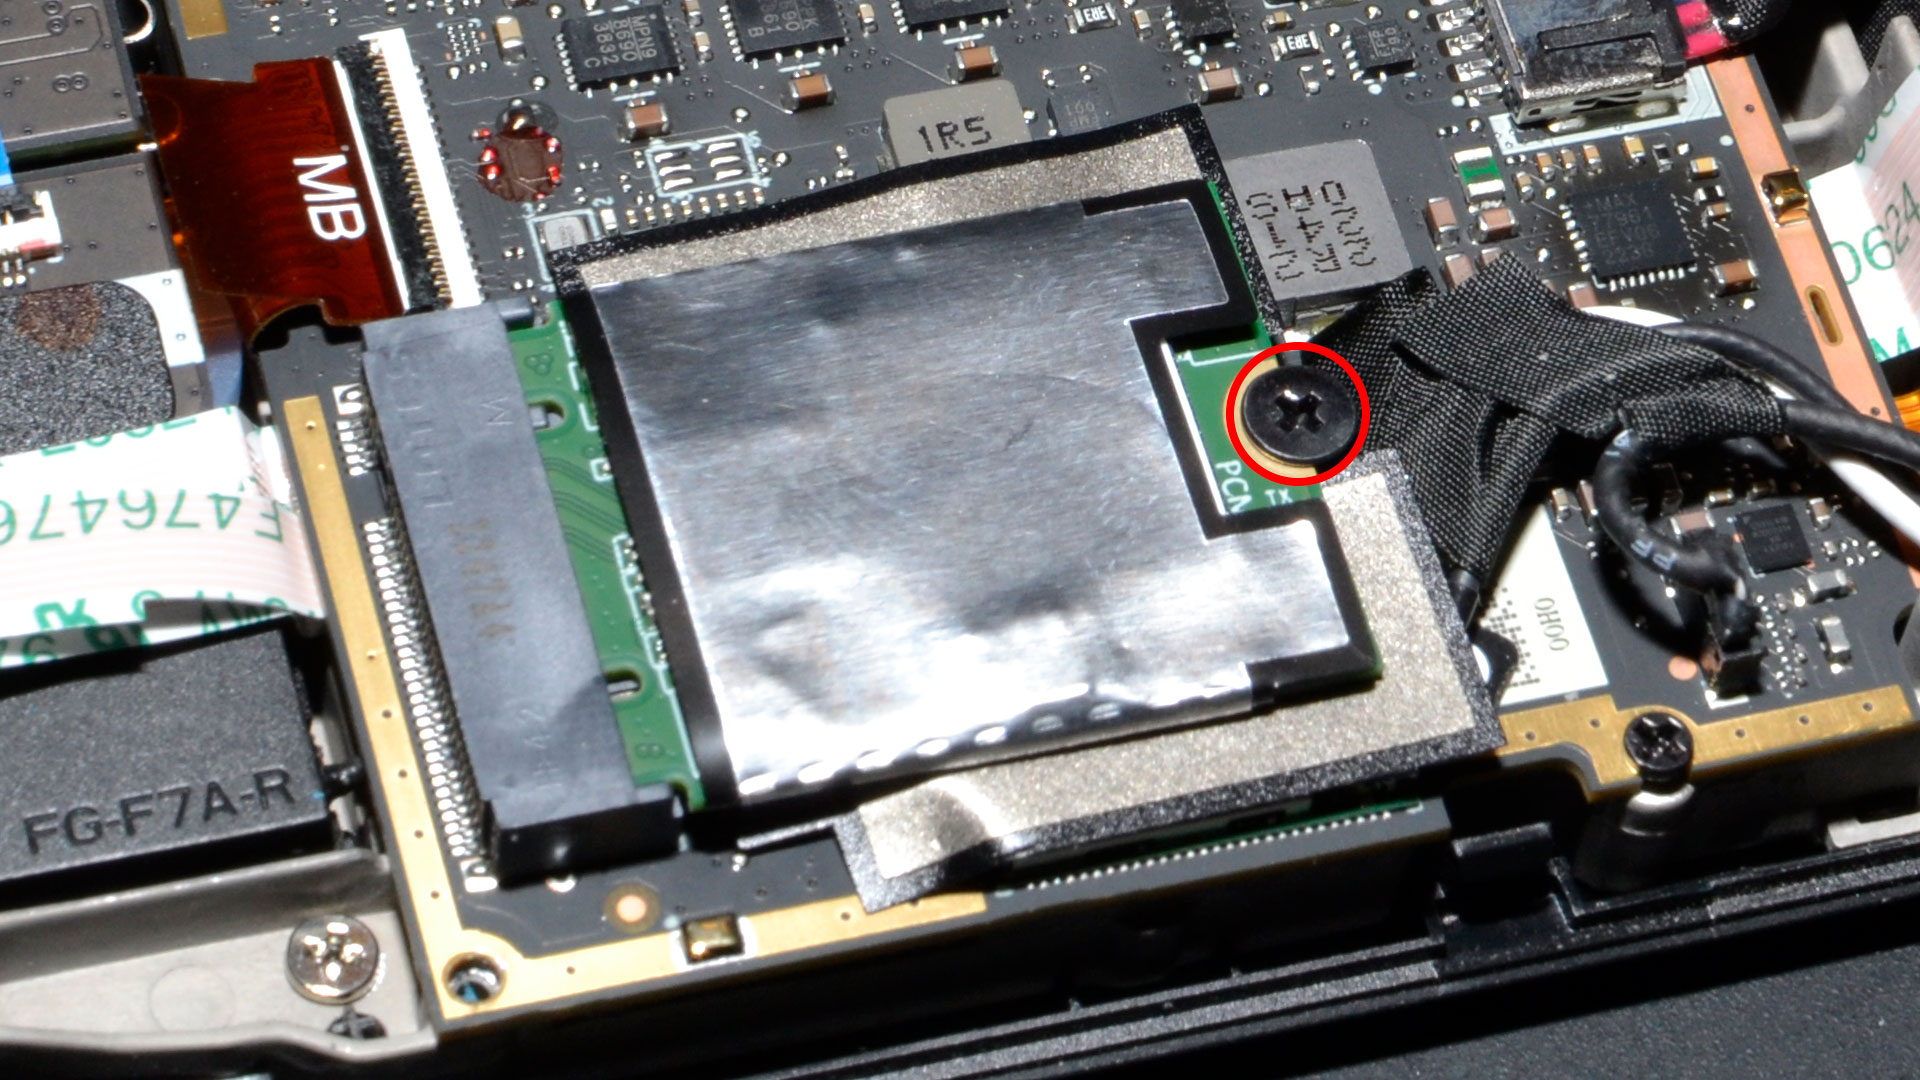 remove the old SSD